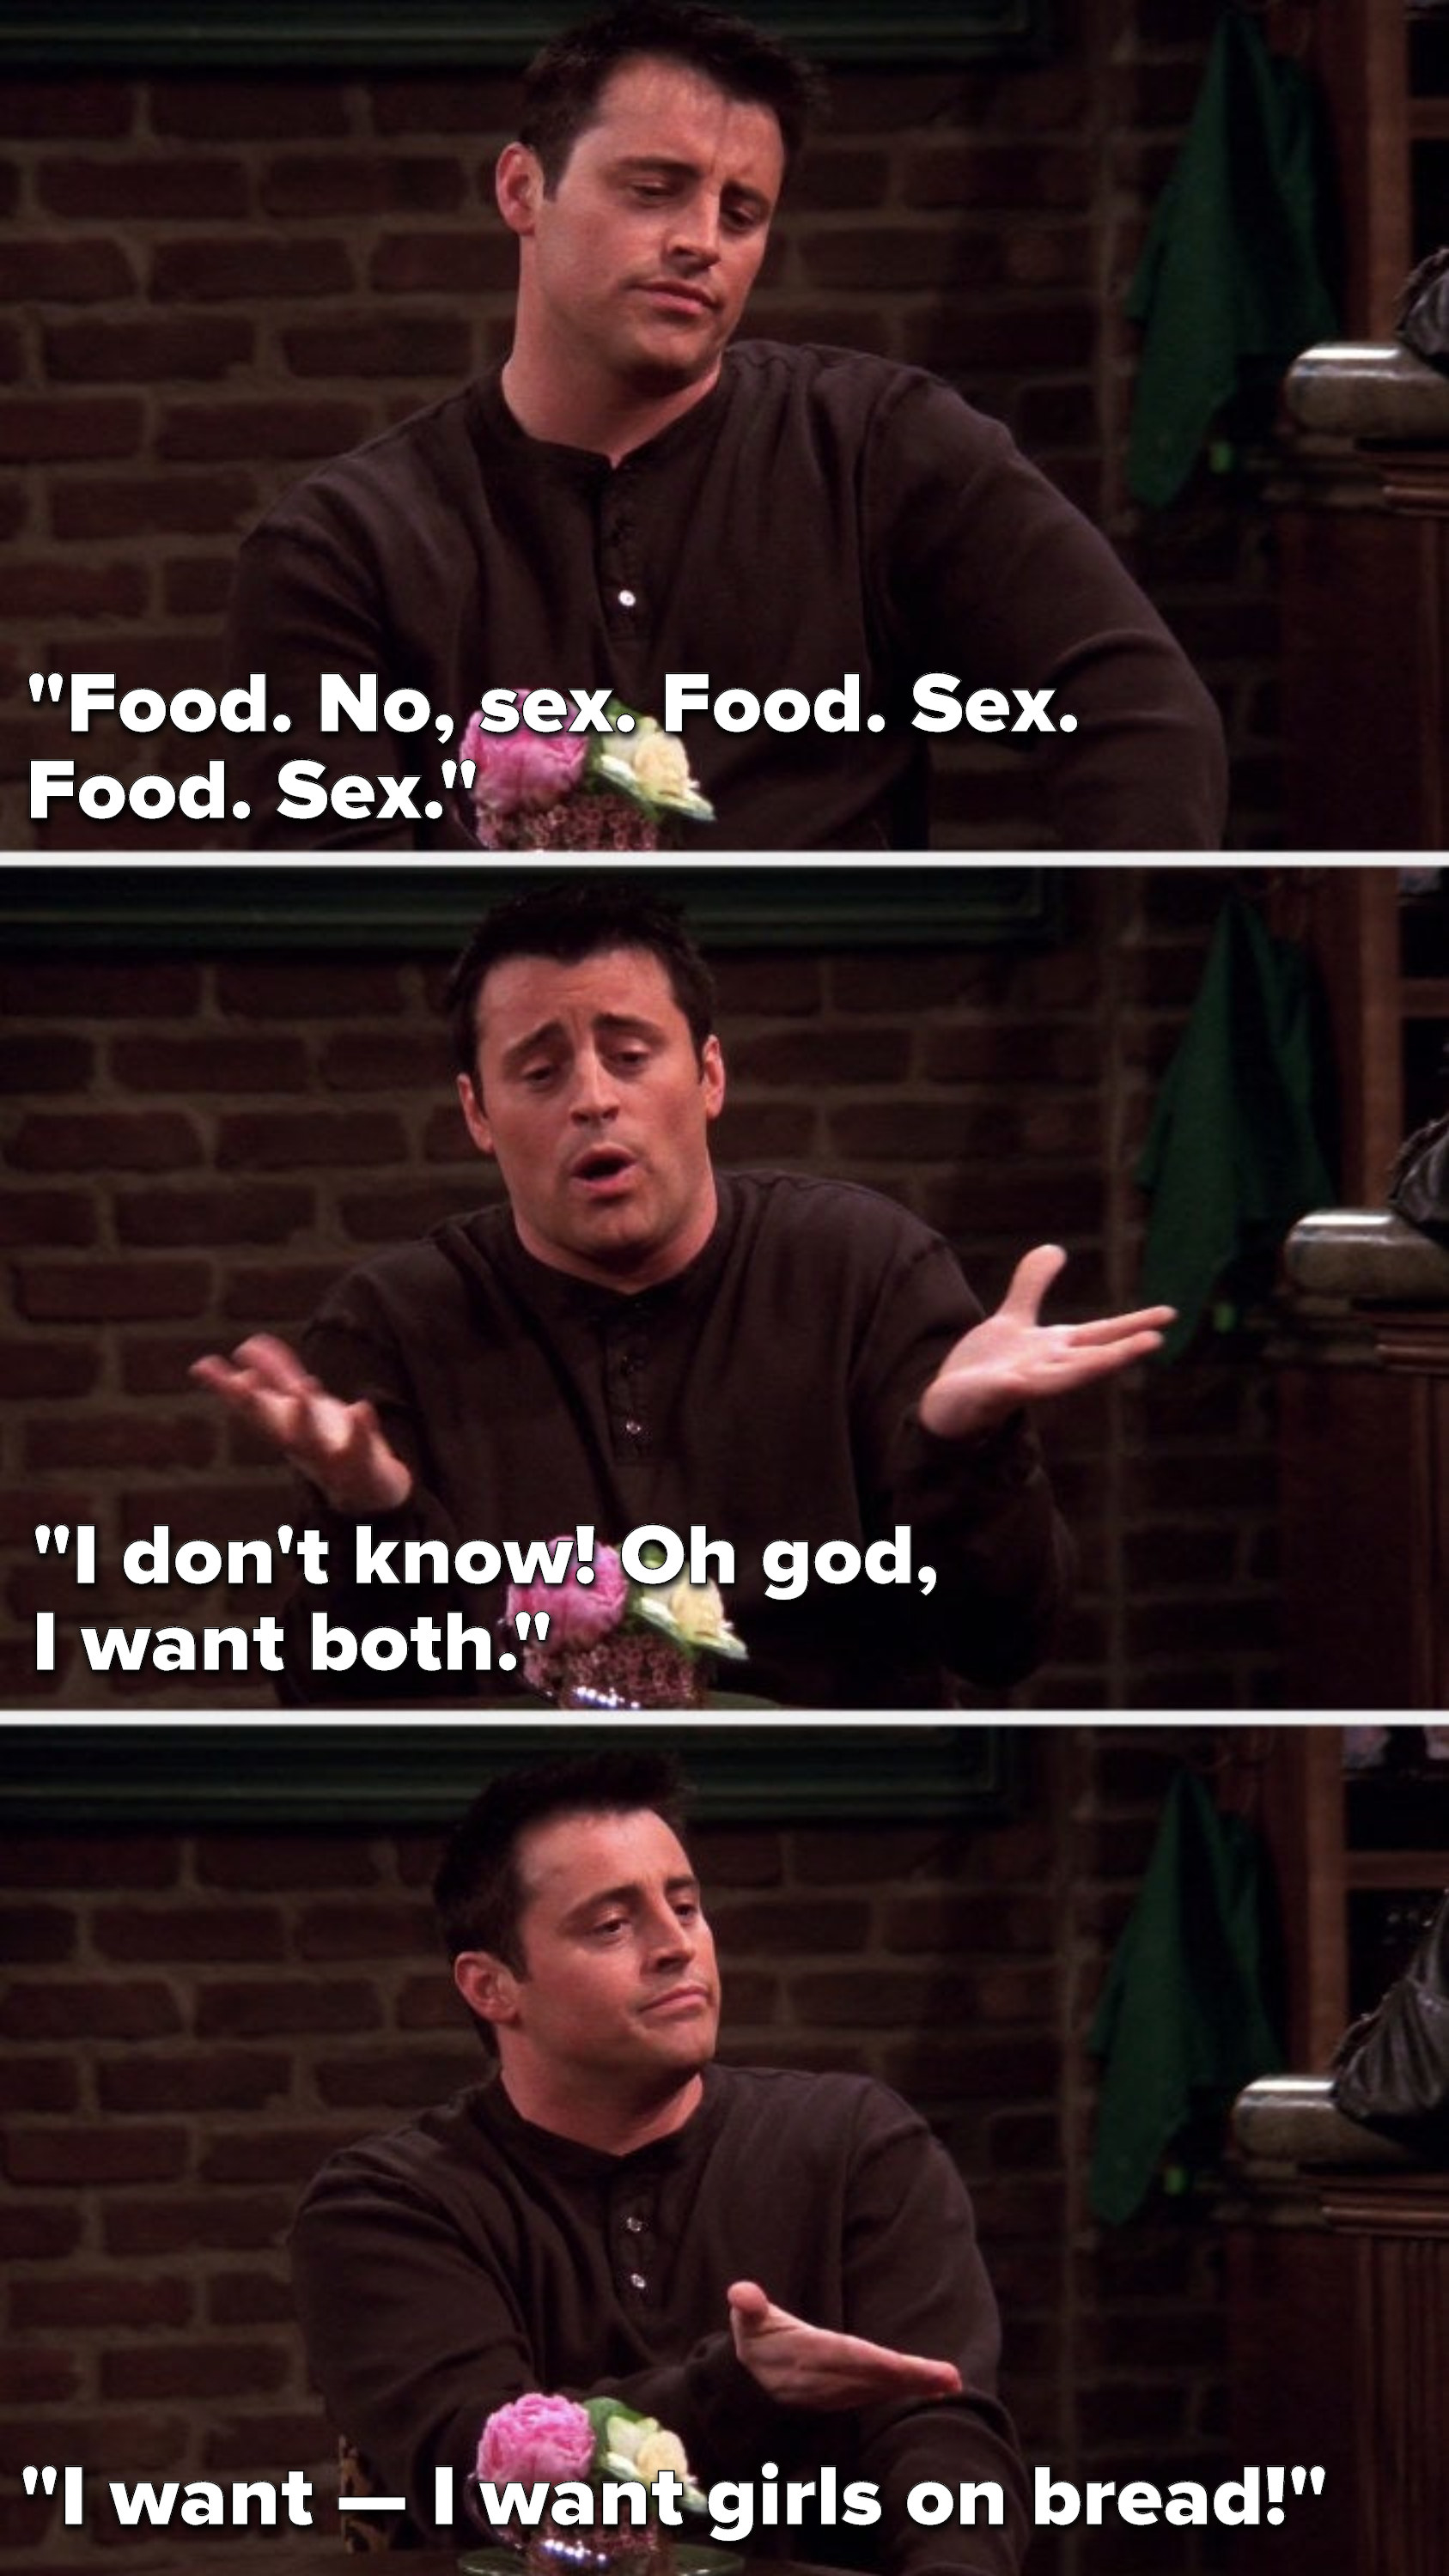 Joey says, &quot;Food, no sex, food, sex, food, sex, I don&#x27;t know, oh god, I want both, I want — I want girls on bread&quot;